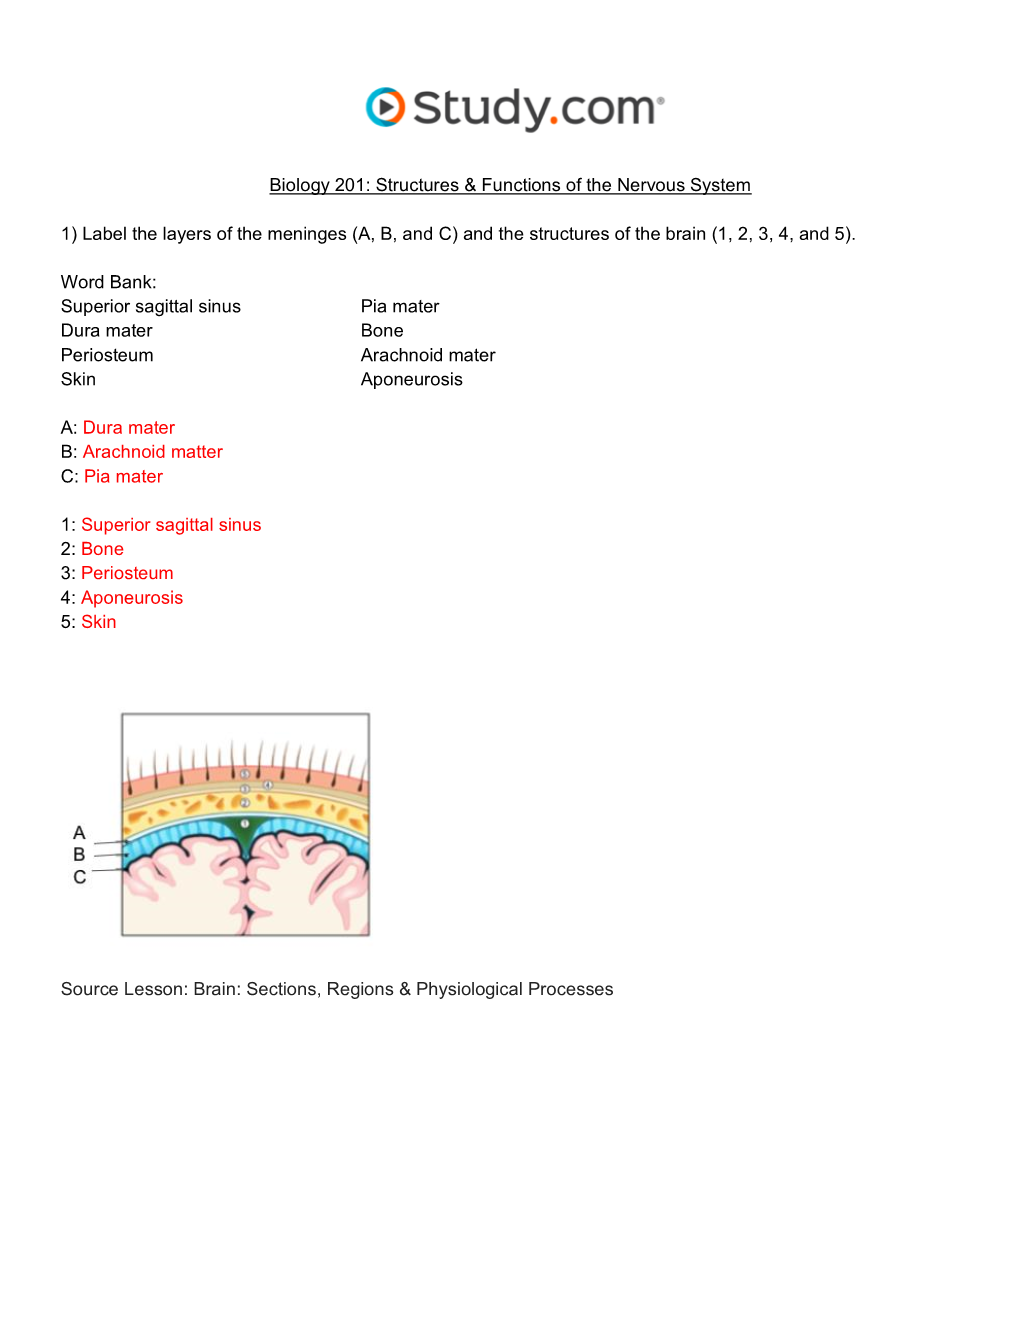 Structures & Functions of the Nervous System Visual Worksheet